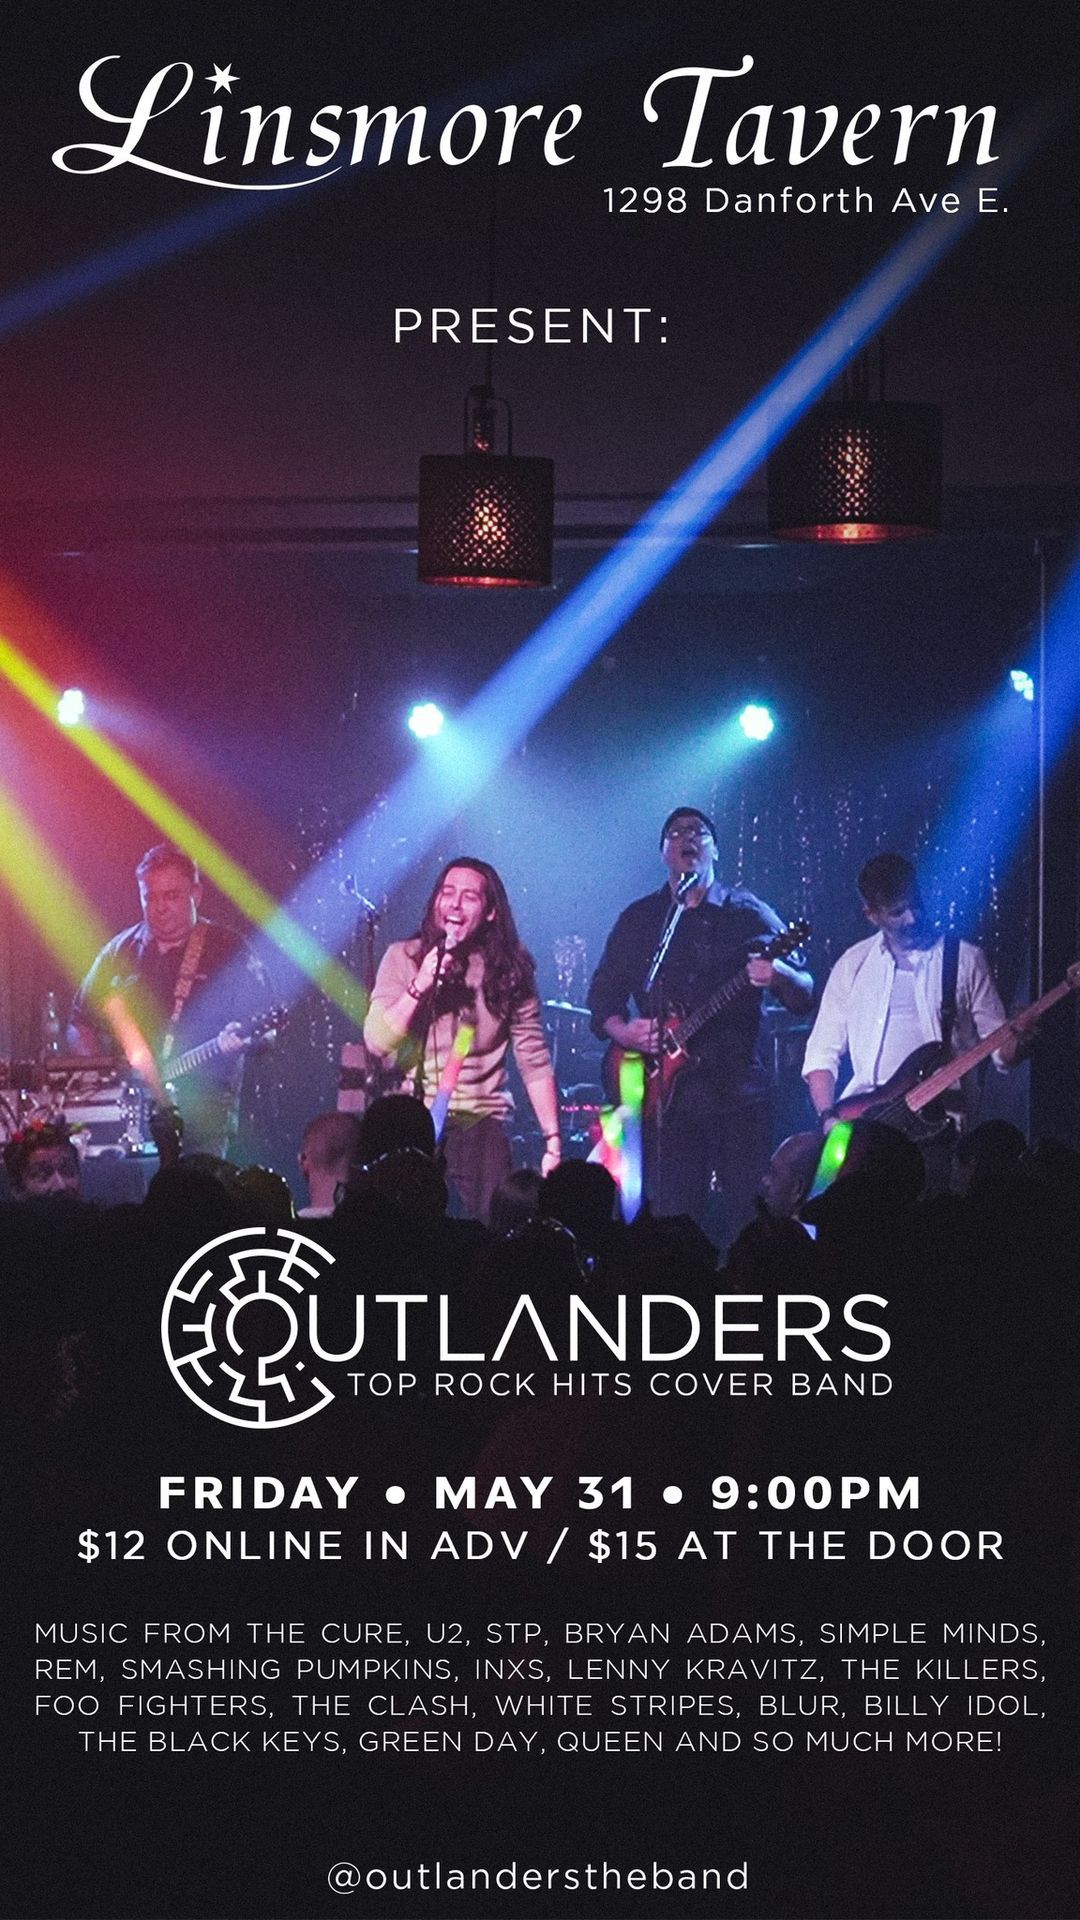 Outlanders Top Rock Hits Cover Band Returns to the Linsmore Tavern!